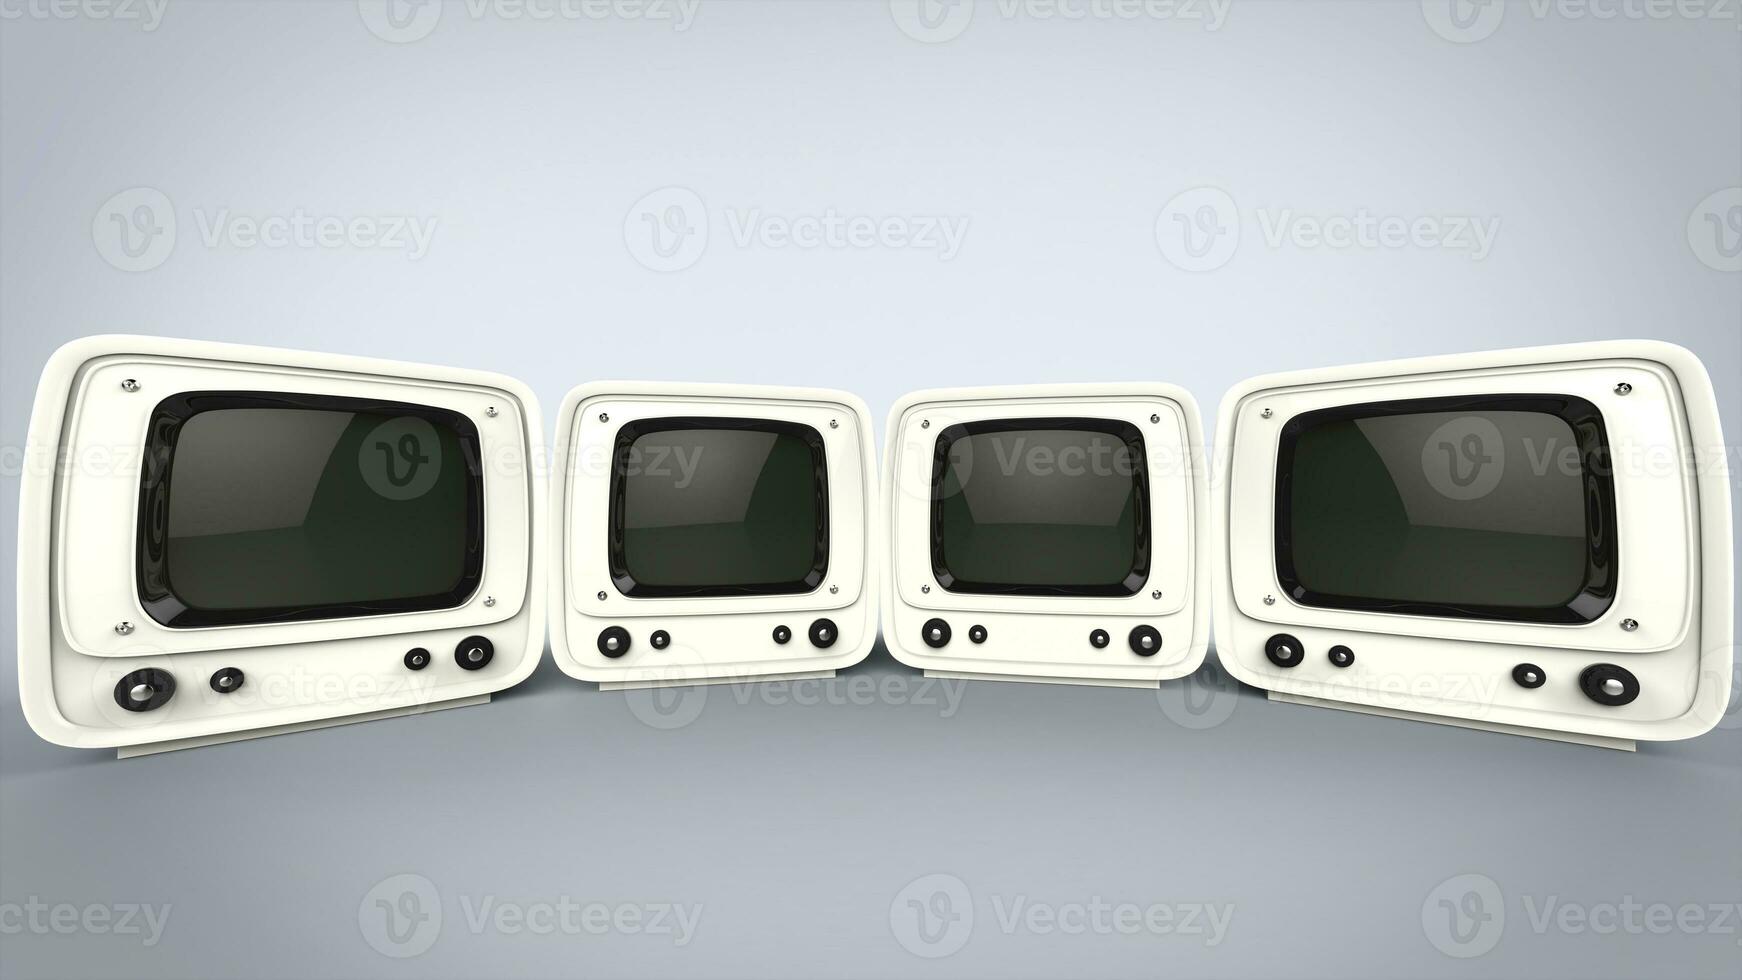 Four vintage style tvs - side by side photo